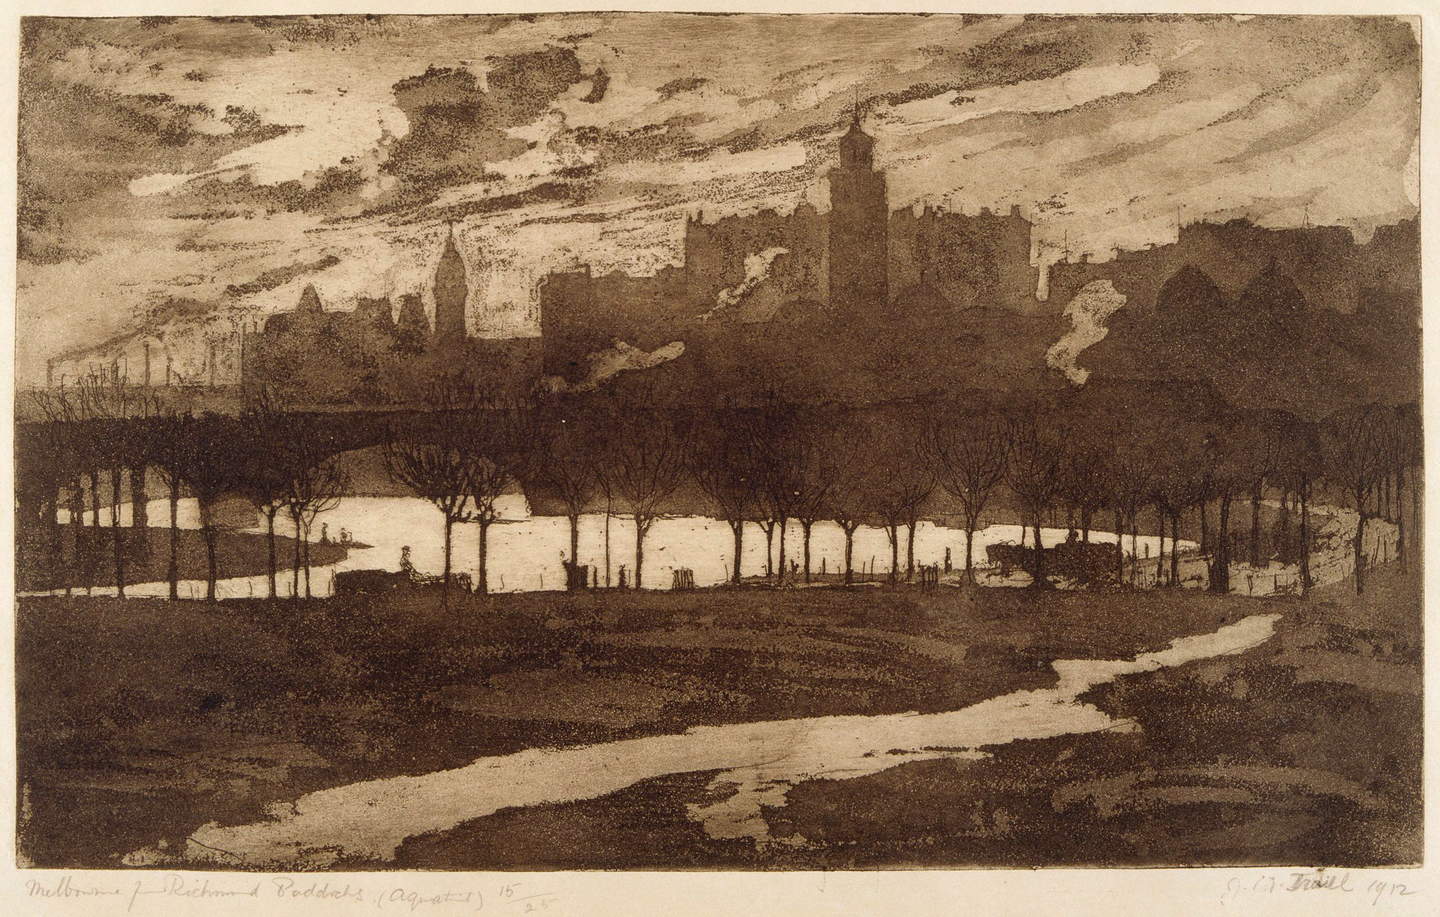 Black and white print of a city skyline in the background with a landscape in the foreground. A river with a is in the centre of the scene, and arched bridge crosses it and trees are in the foreground. The sky is full of clouds.